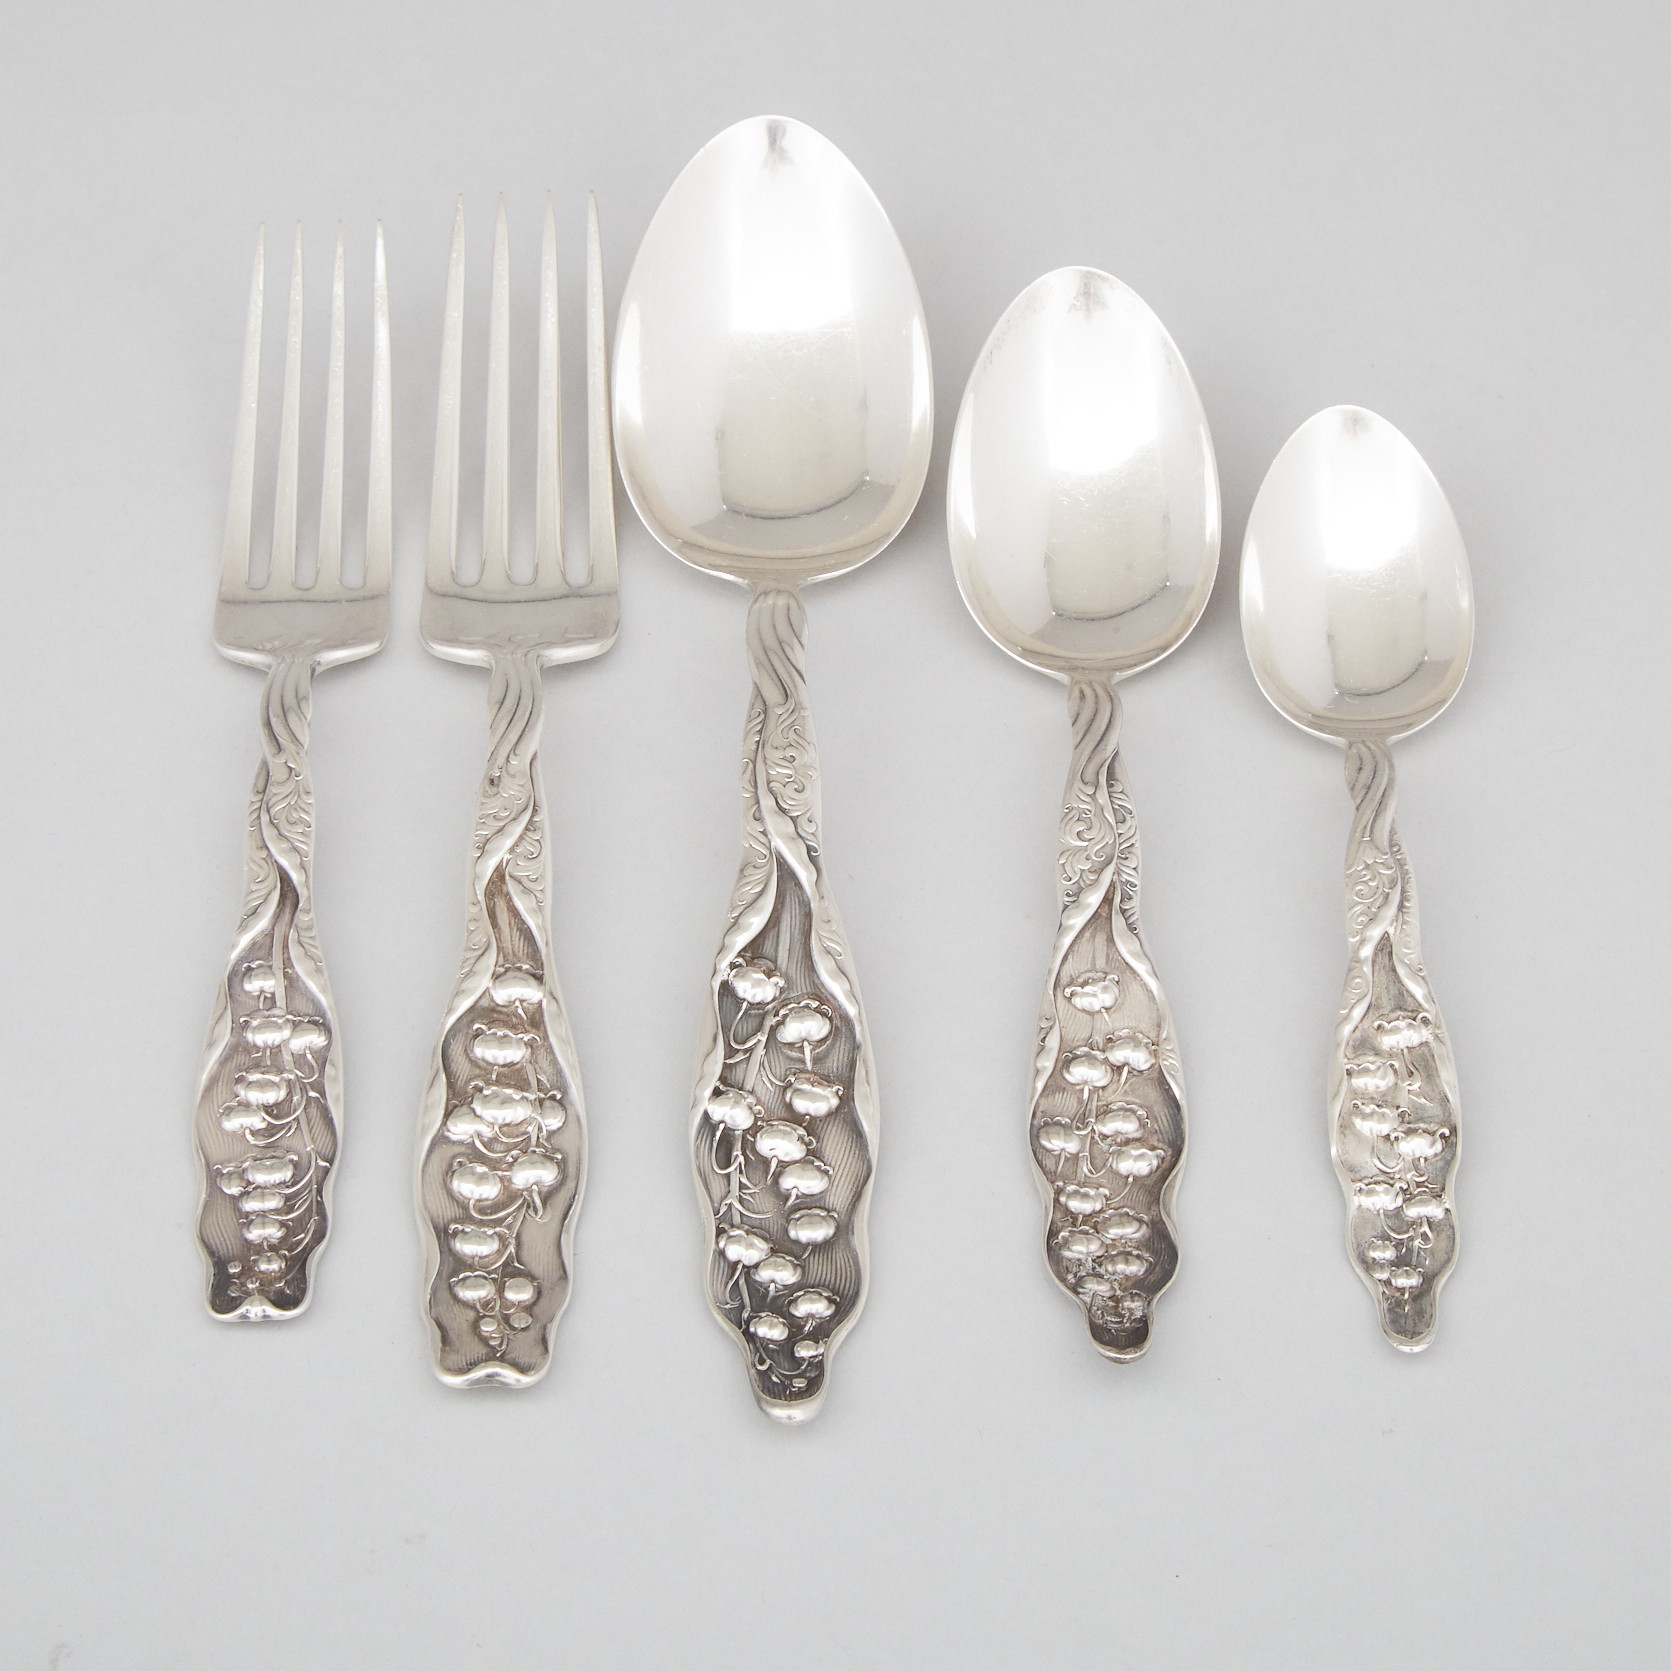 American Silver 'Lily of the Valley' Pattern Flatware, Whiting Mfg. Co., New York, N.Y., early 20th century